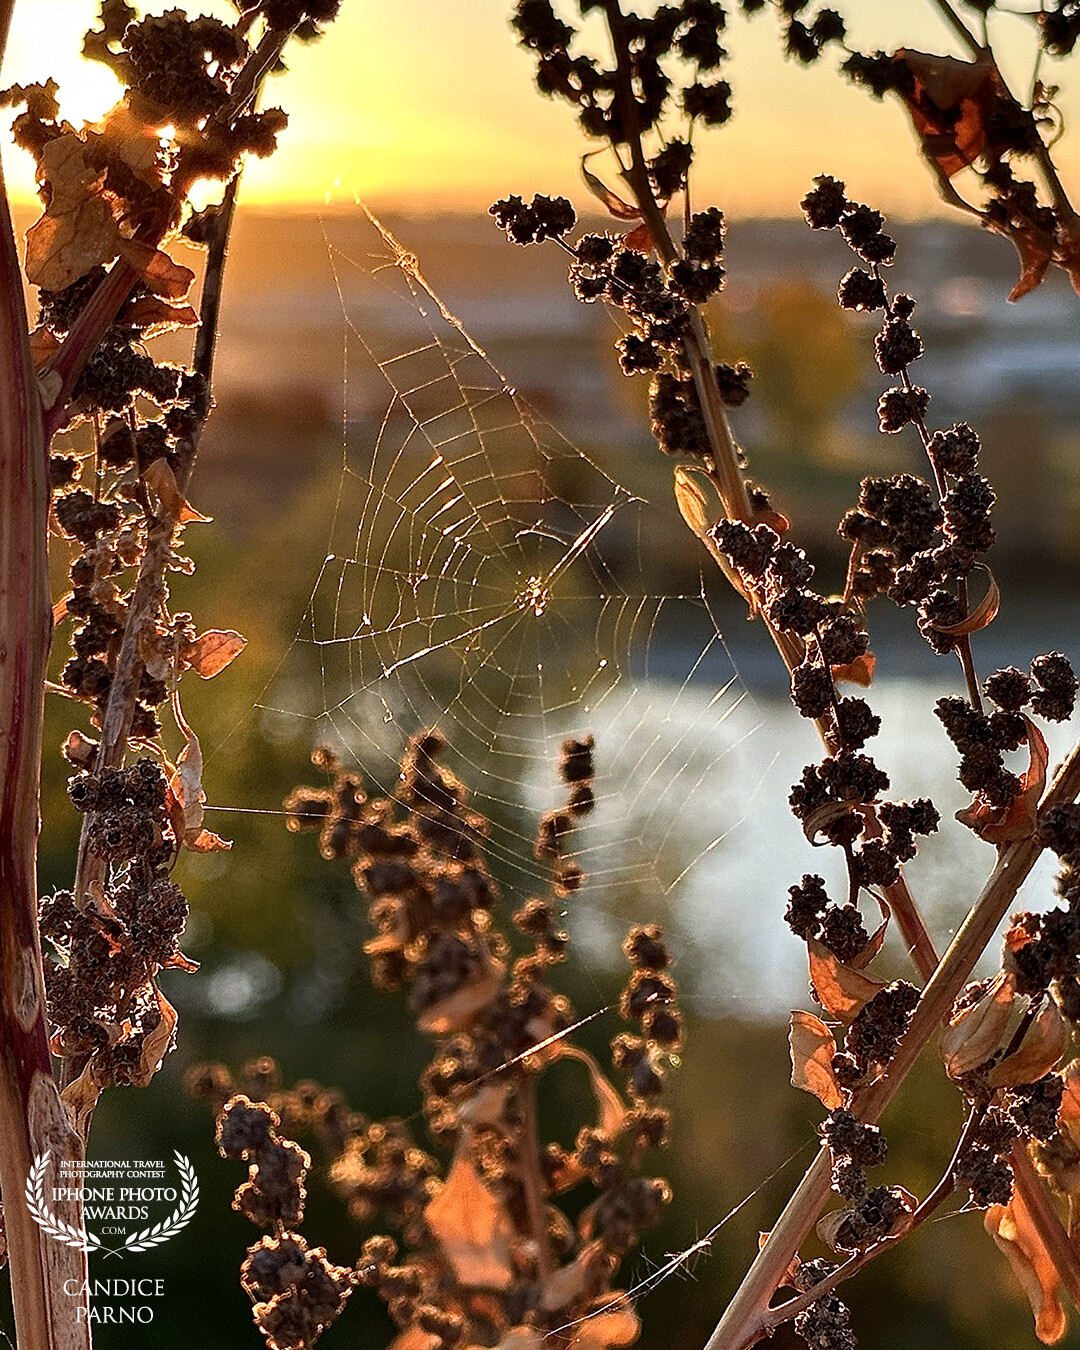 Who could resist capturing the beautiful fall golden light highlighting this spiderweb.